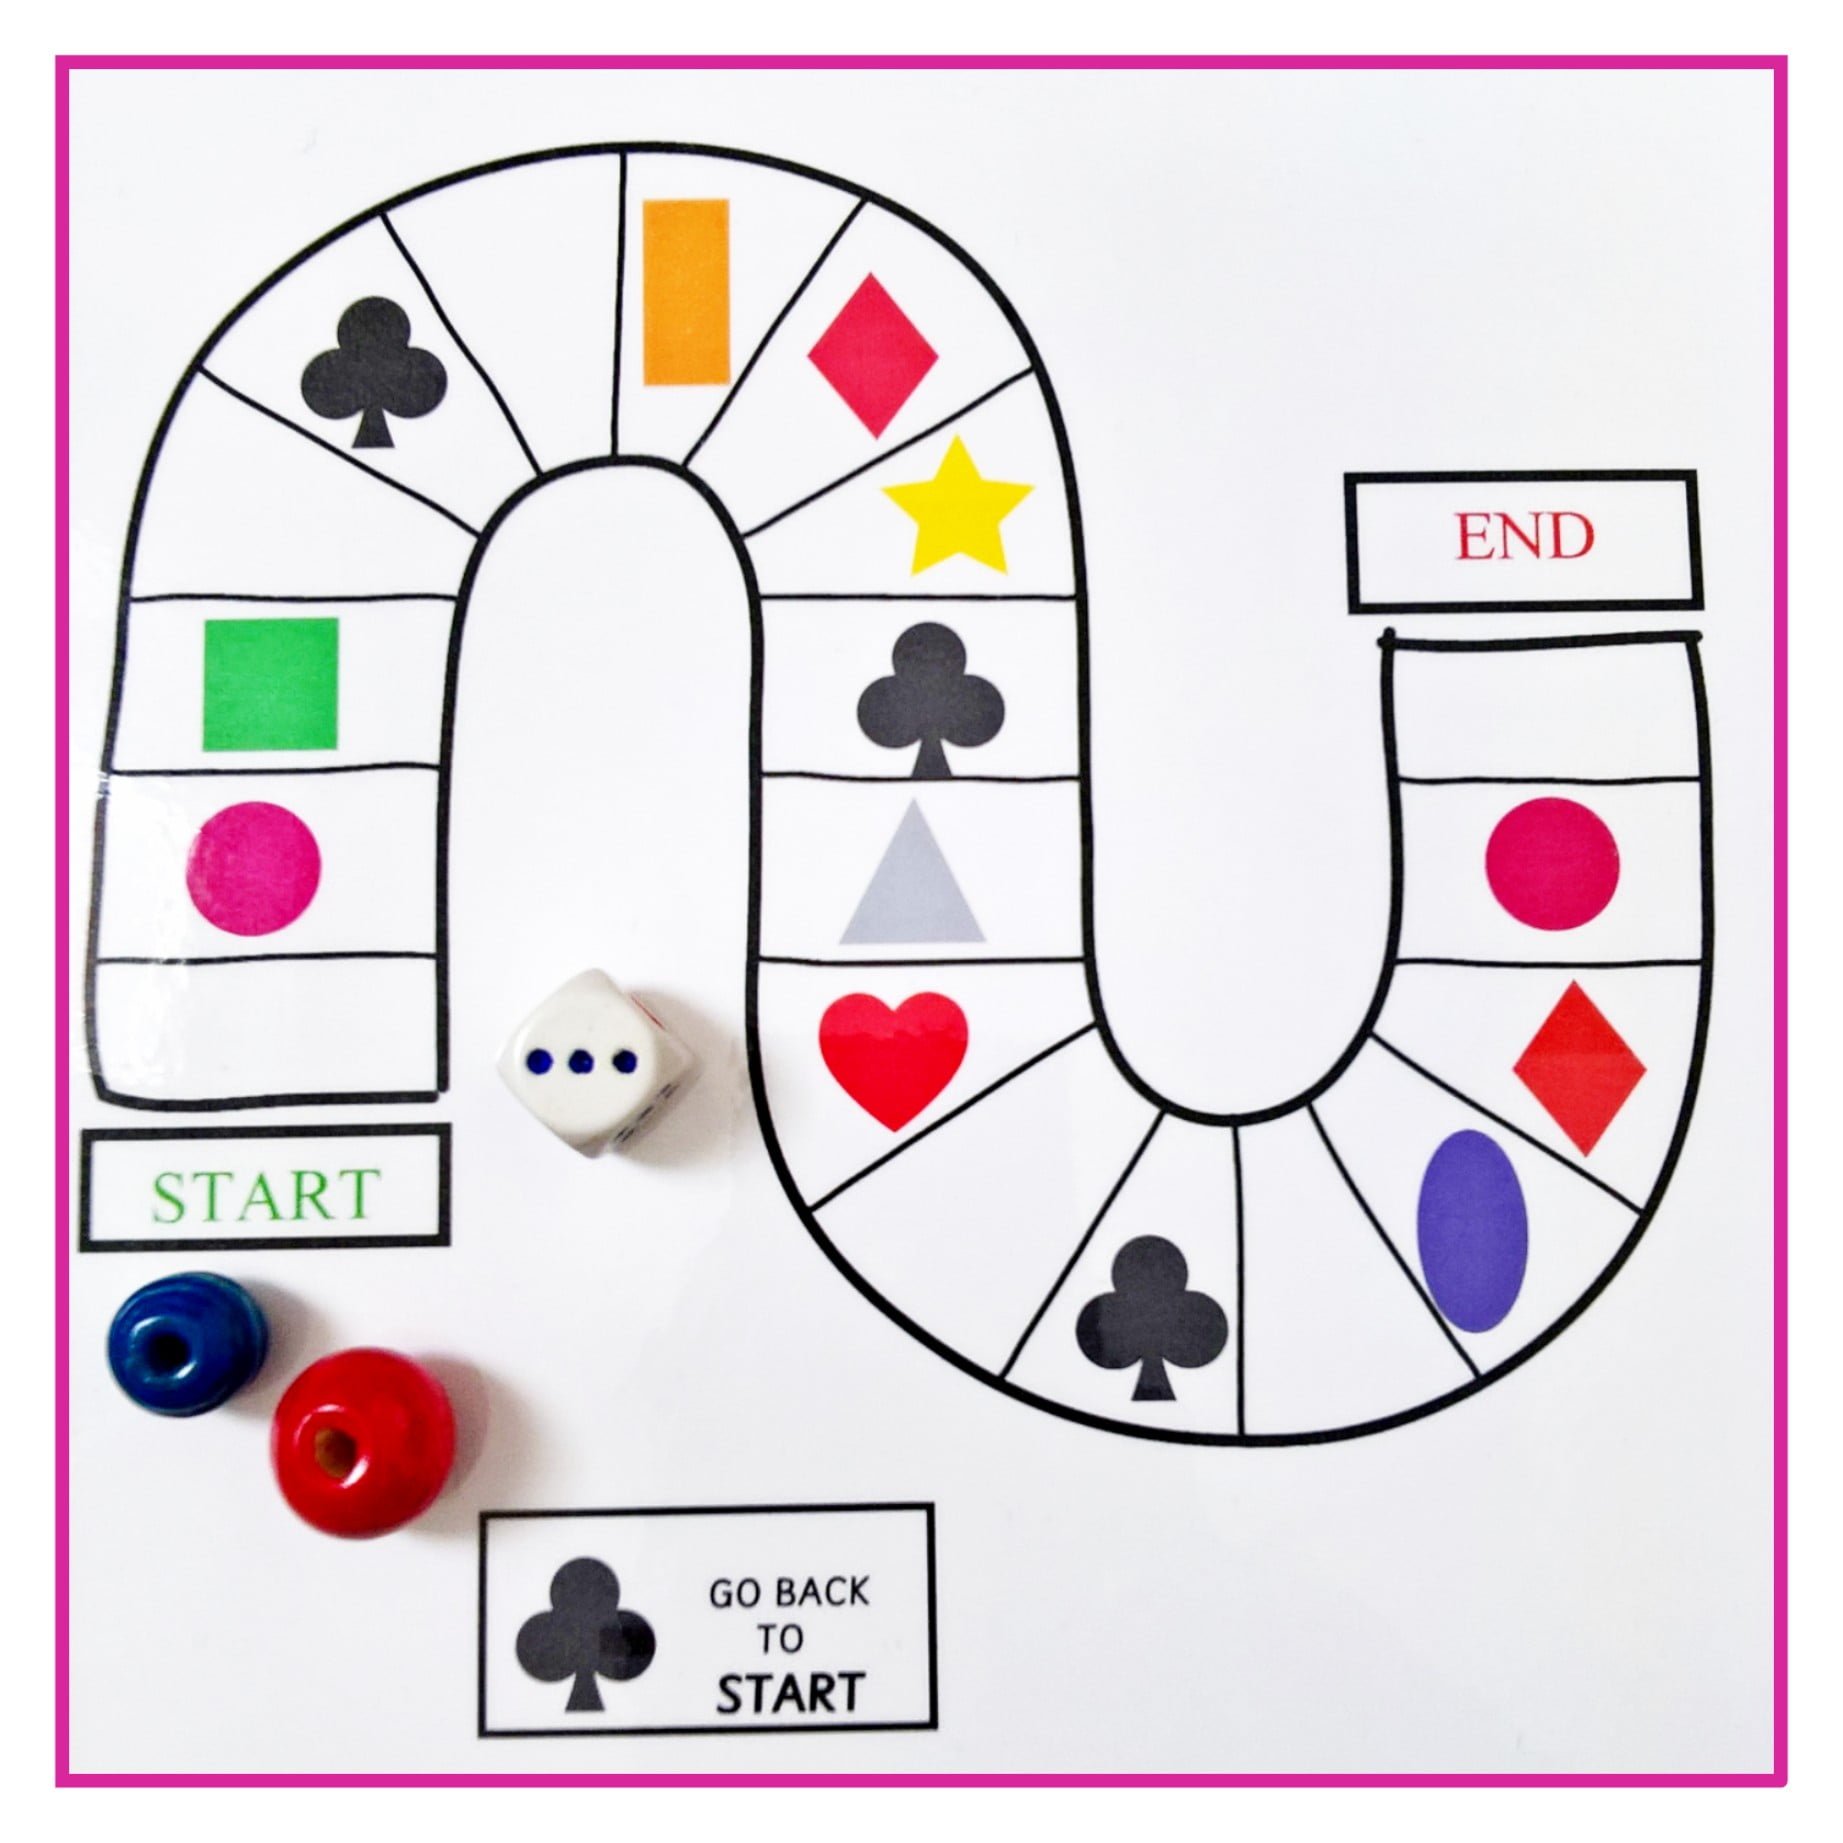 THE SHAPES BOARD GAME